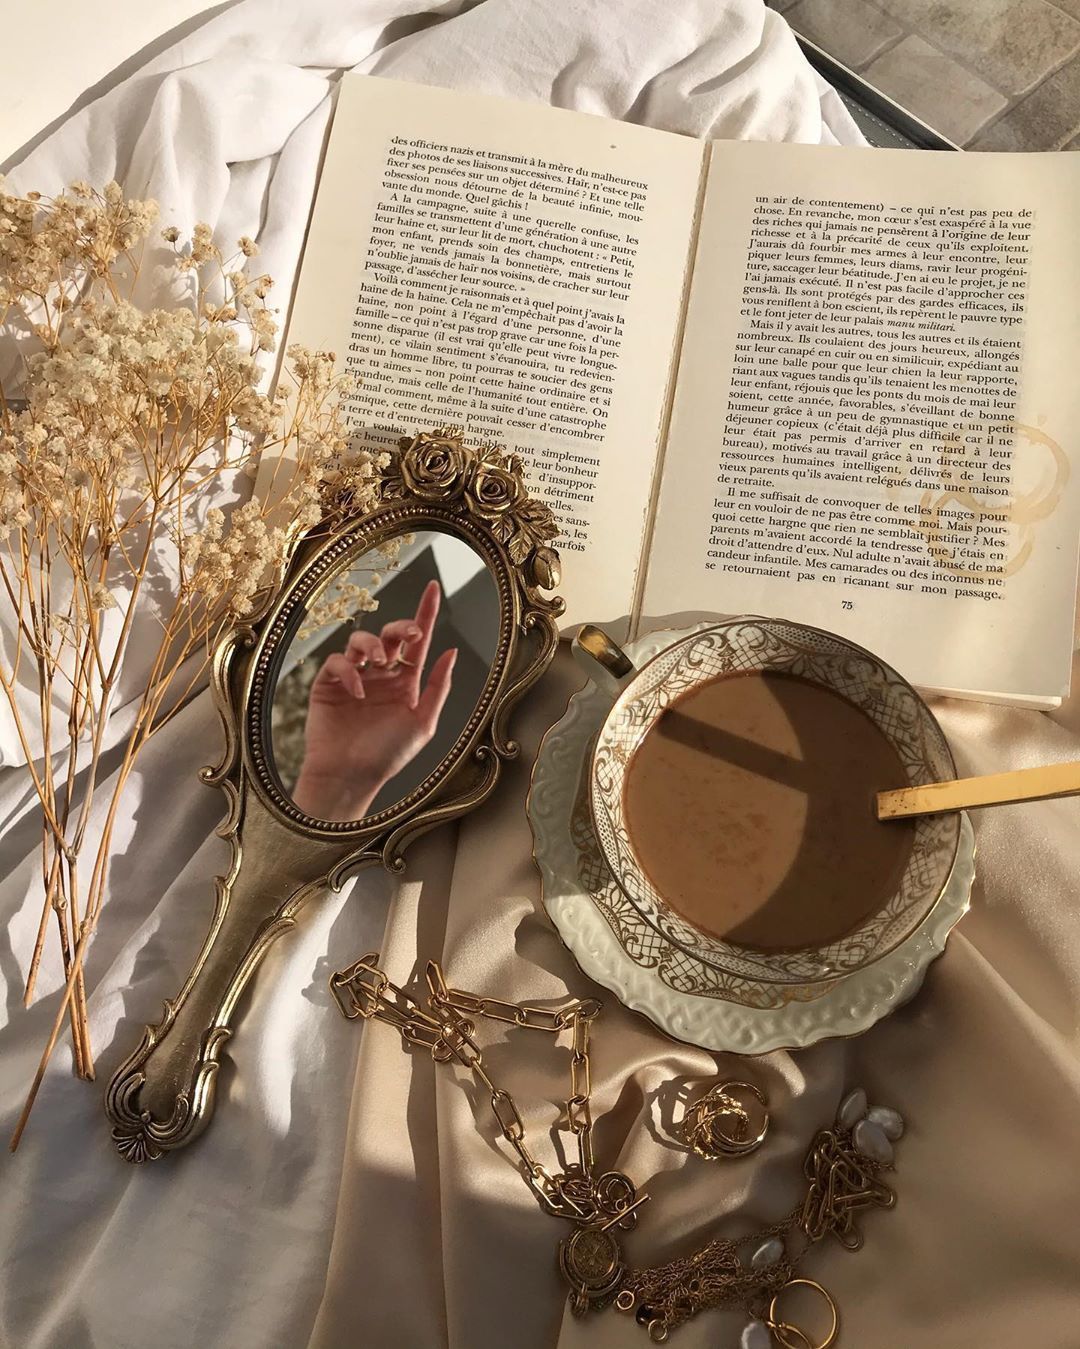 A book, a cup of coffee, a mirror, and some necklaces - Vintage, photography, Dior, champagne, coffee, retro